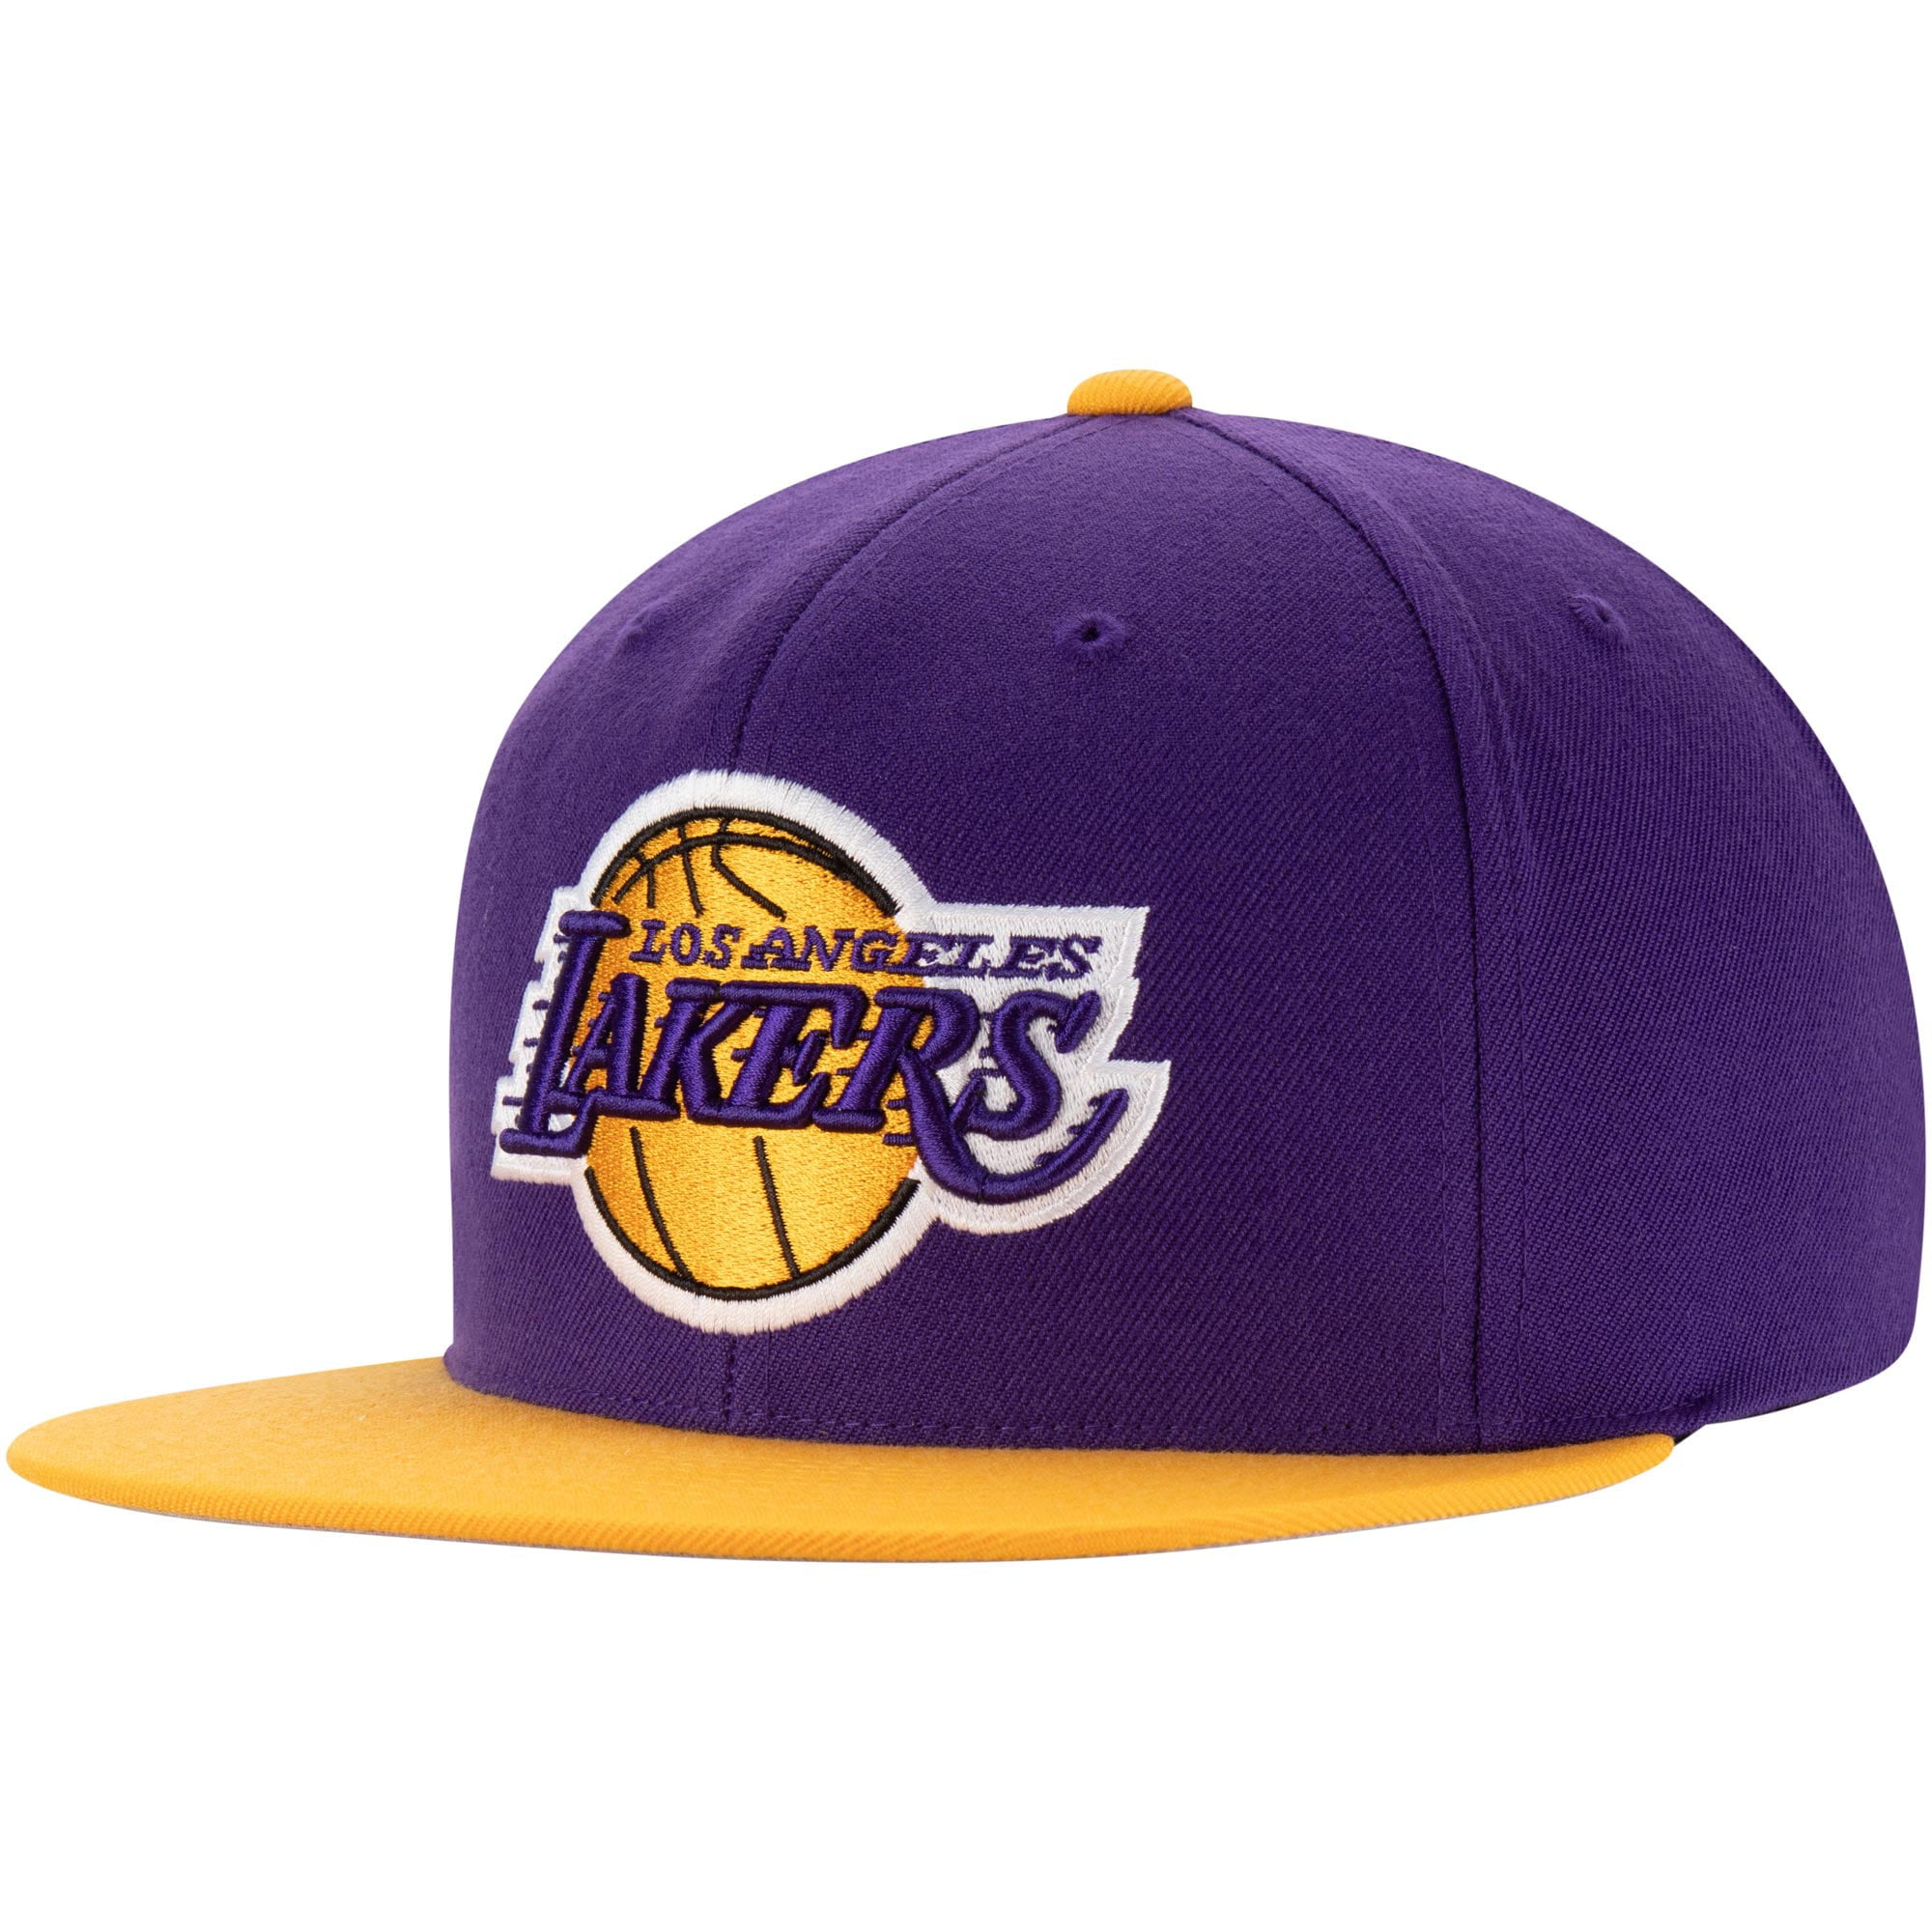 Buy Los Angeles Lakers Mitchell & Ness Two-Tone Wool Snapback Hat - PurpleGold - OSFA Online at Lowest Price in India. 698351089